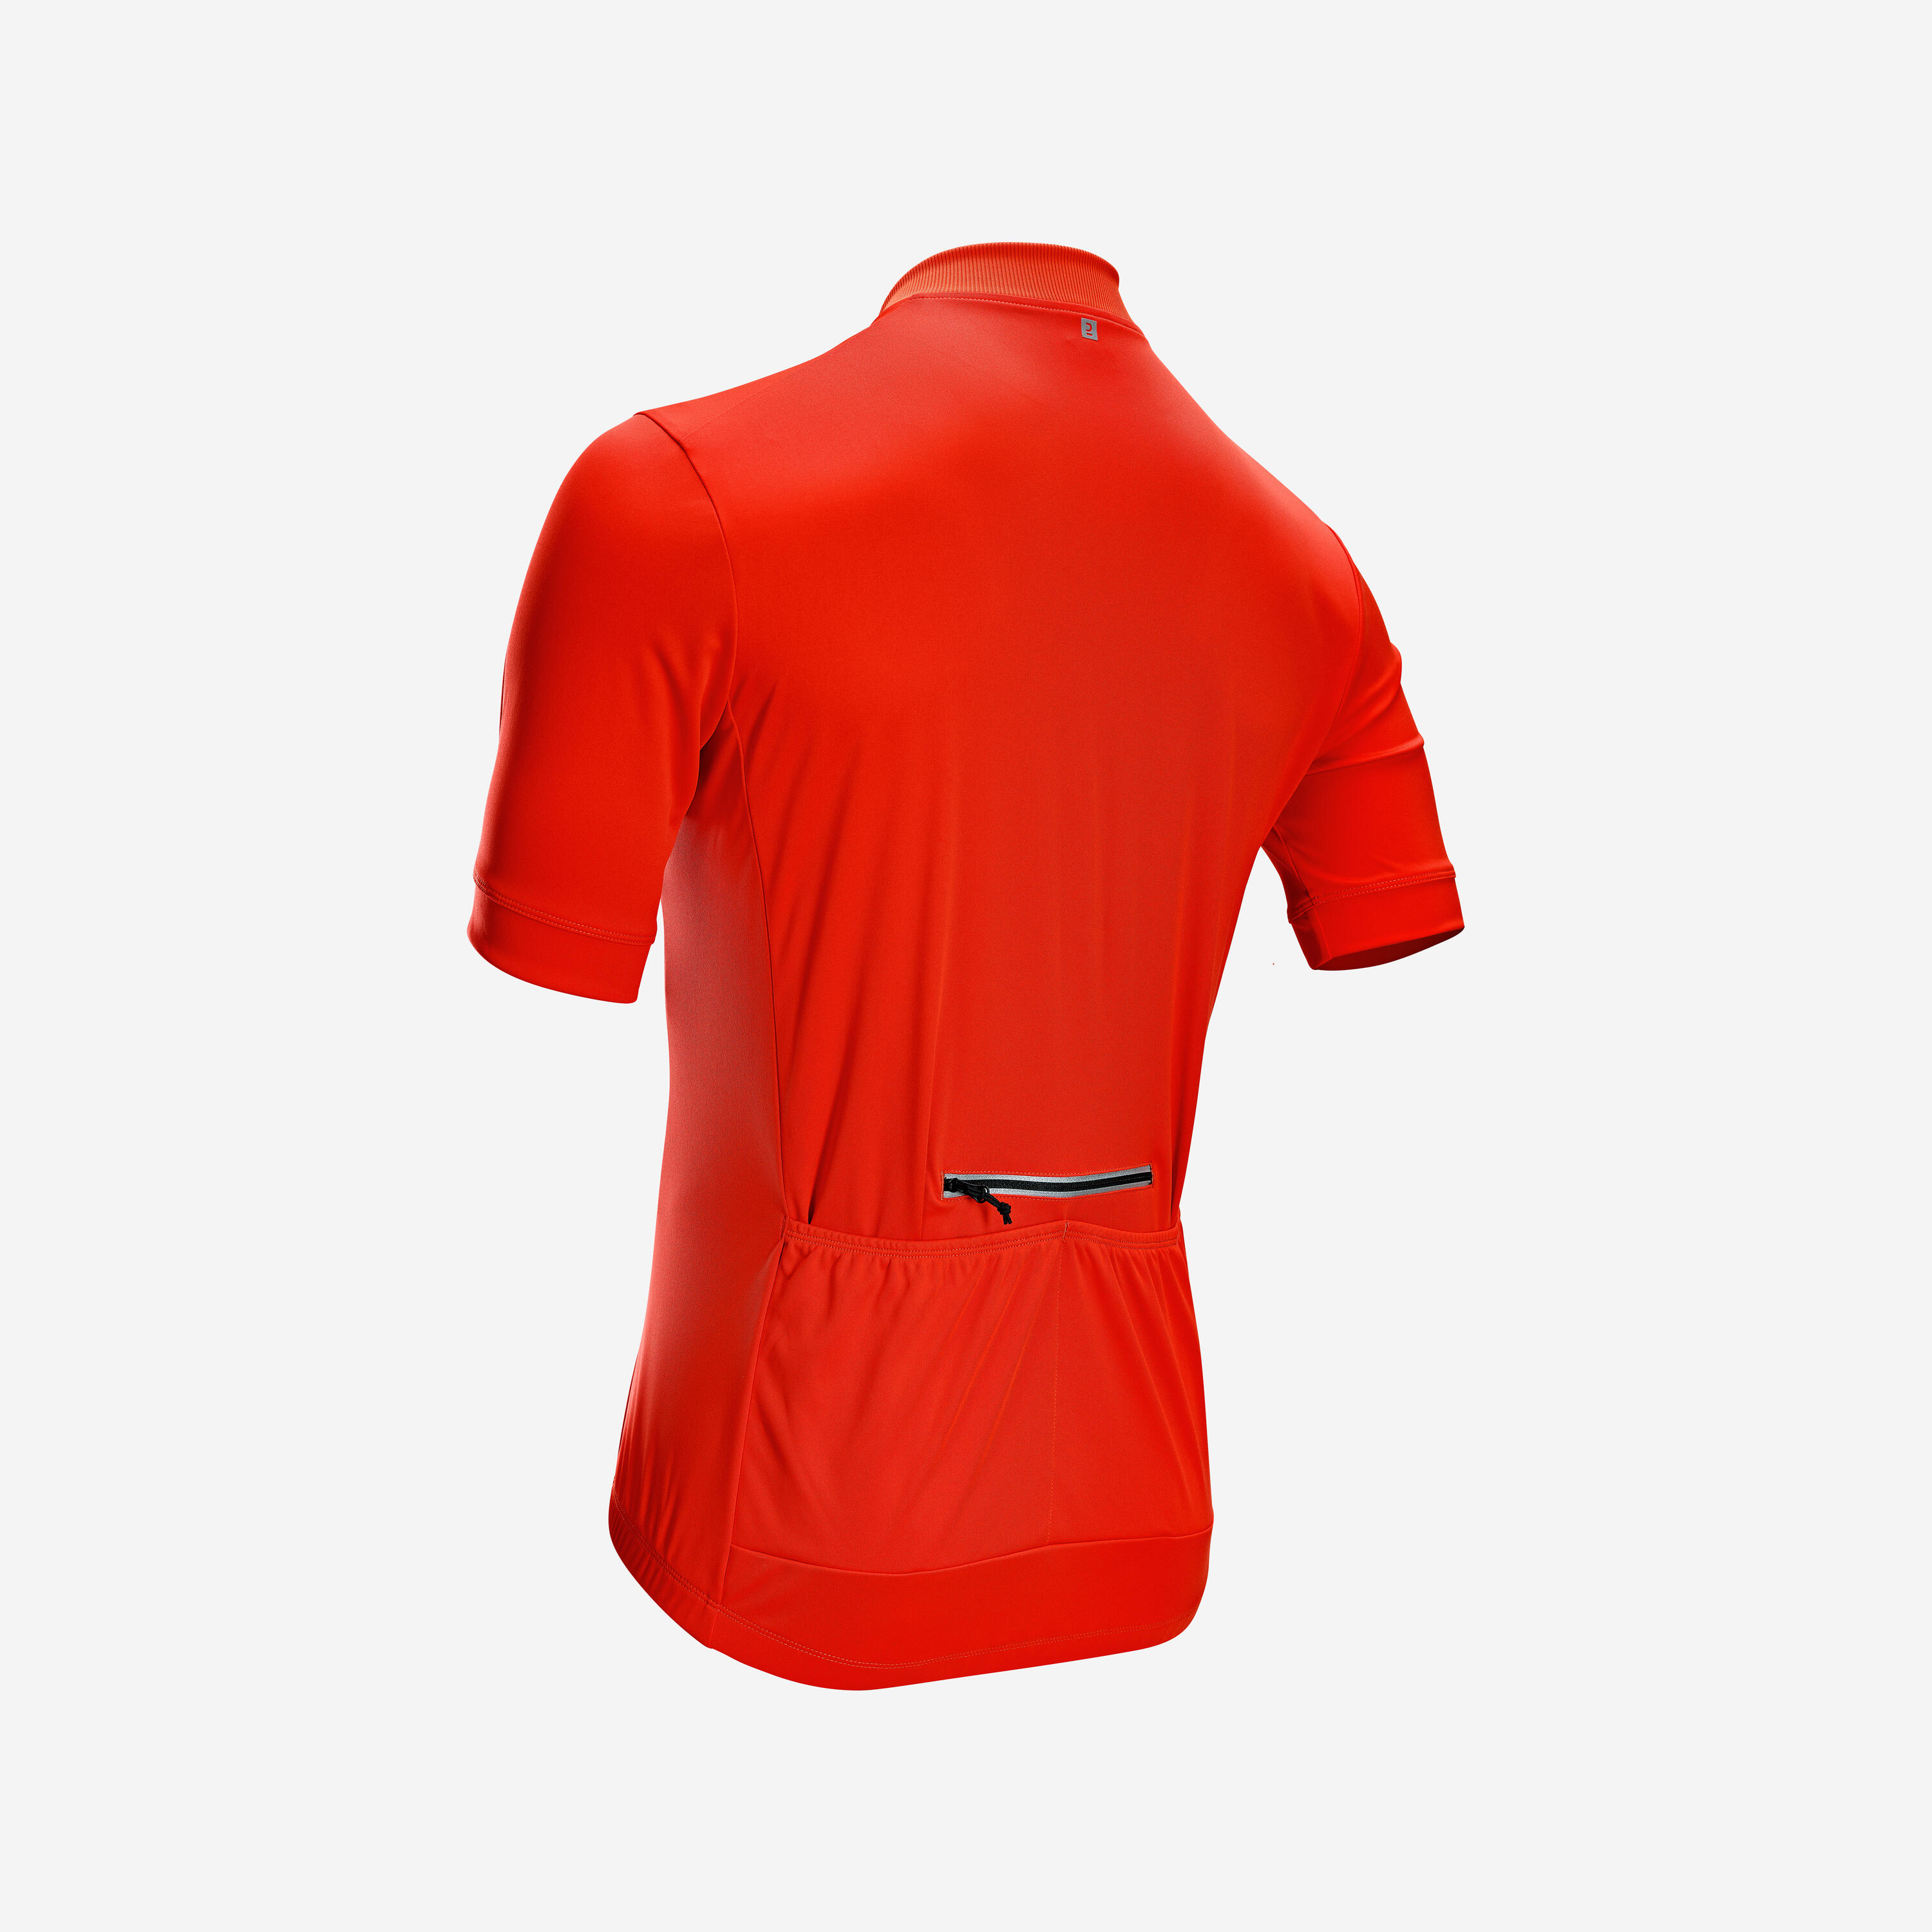 Men's Short-Sleeved Road Cycling Summer Jersey RC100 - Red 3/7